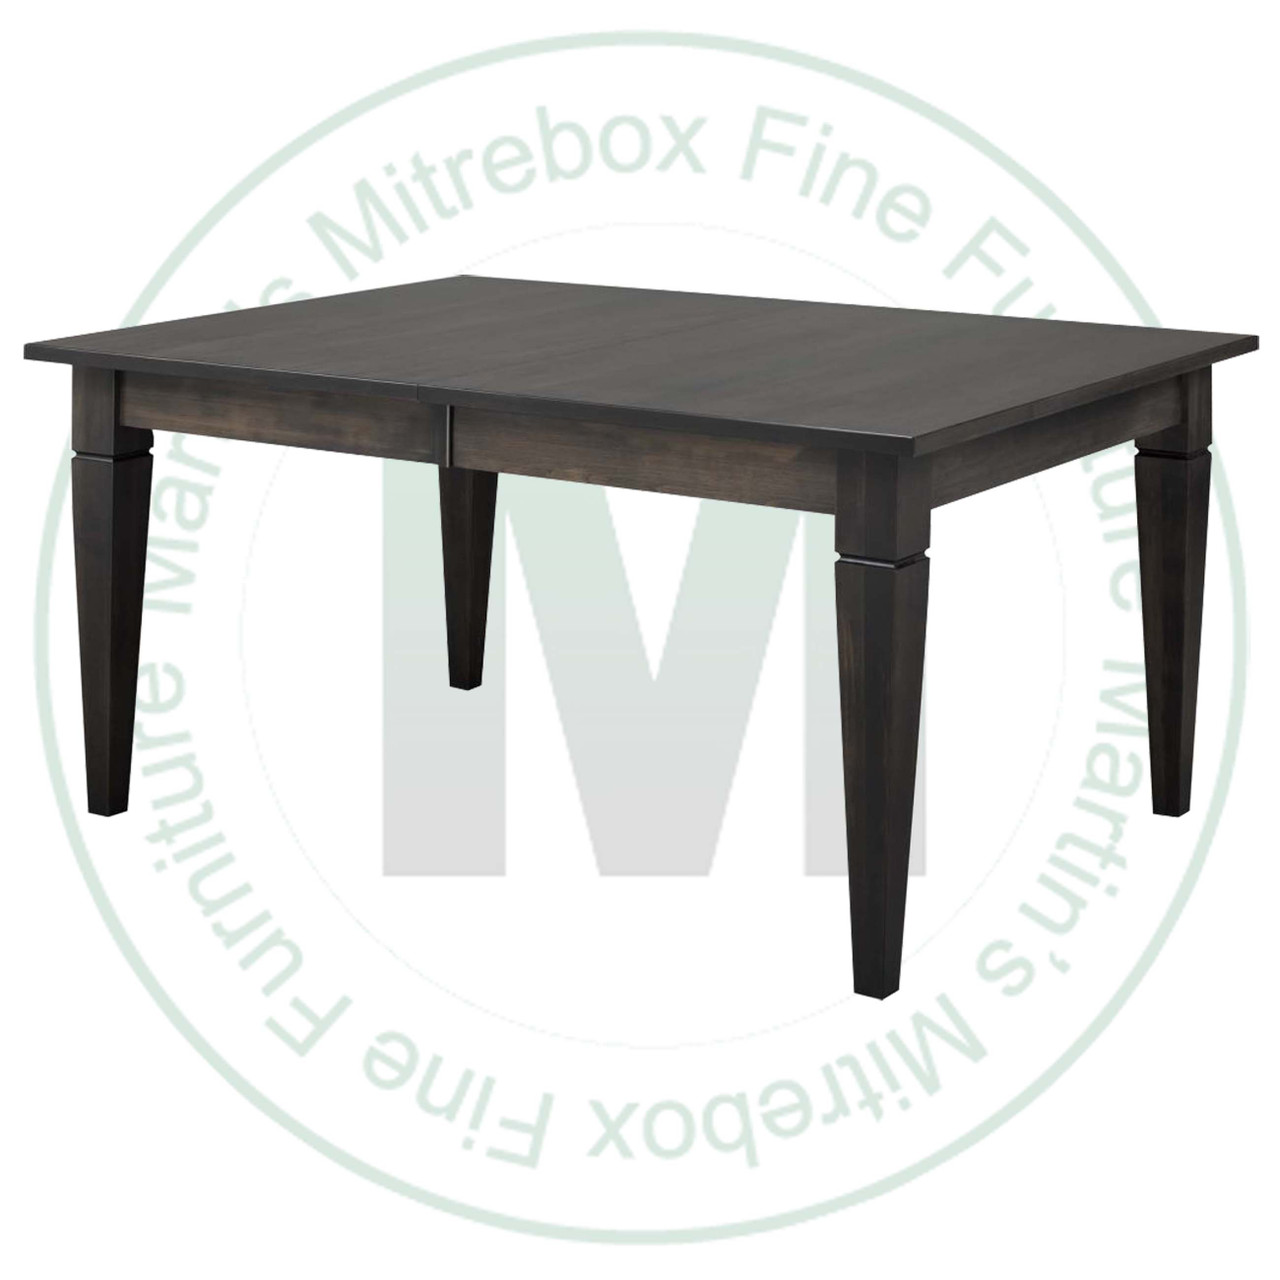 Maple Reesor Extension Harvest Table 48''D x 84''W x 30''H With 2 - 12'' Leaves Table Has 1'' Thick Top